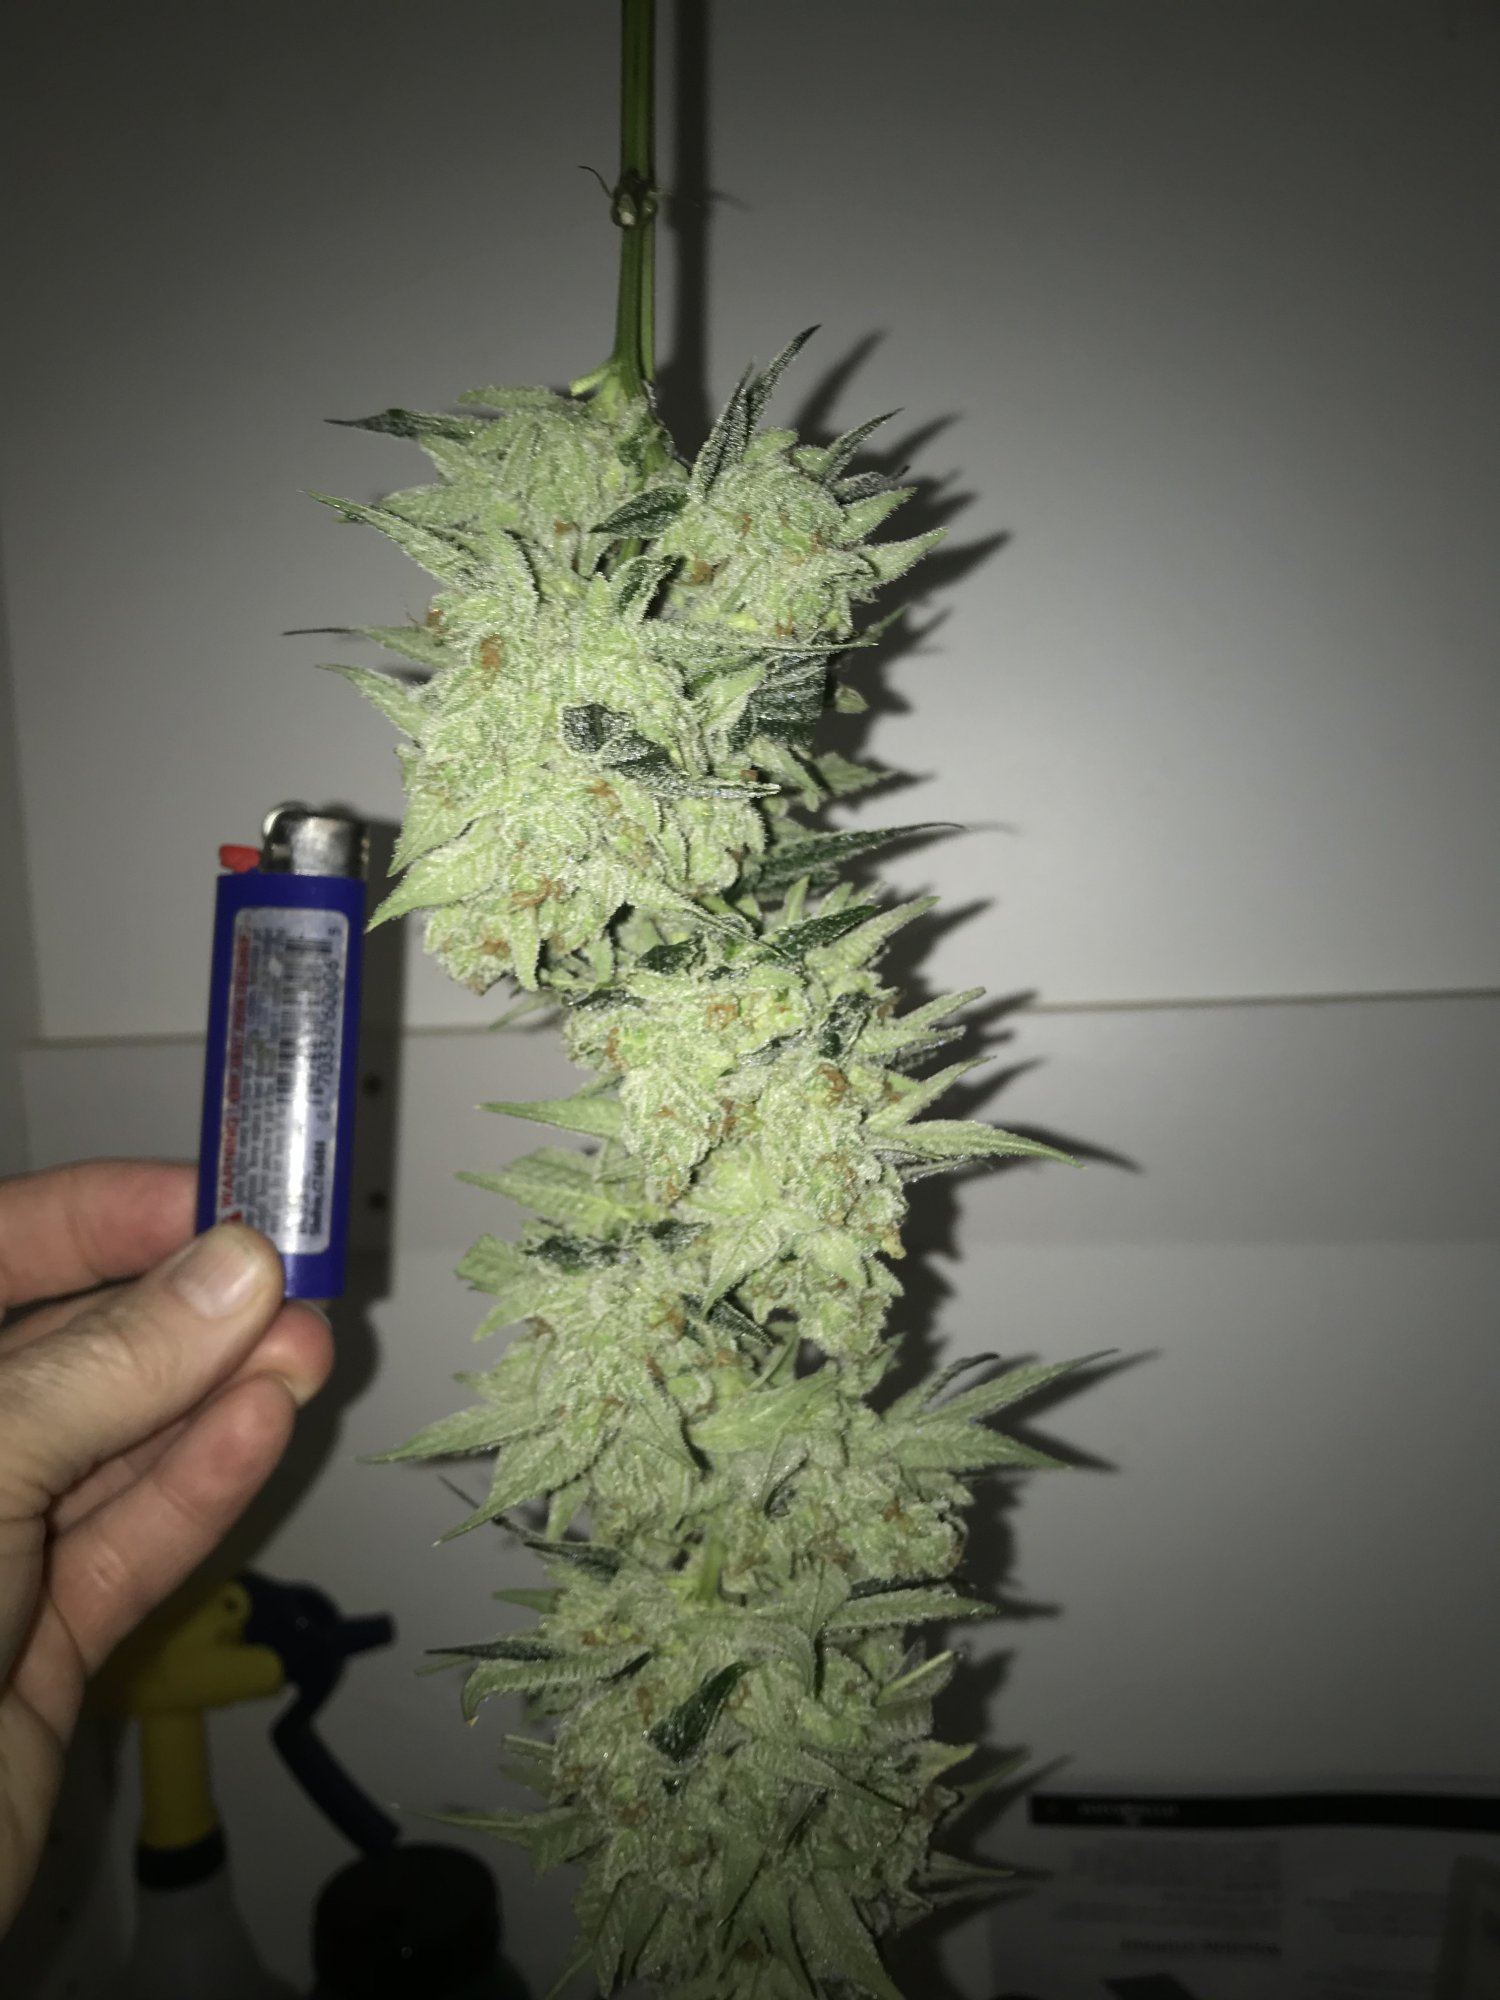 Lost a nice cola 10 days to harvest 2